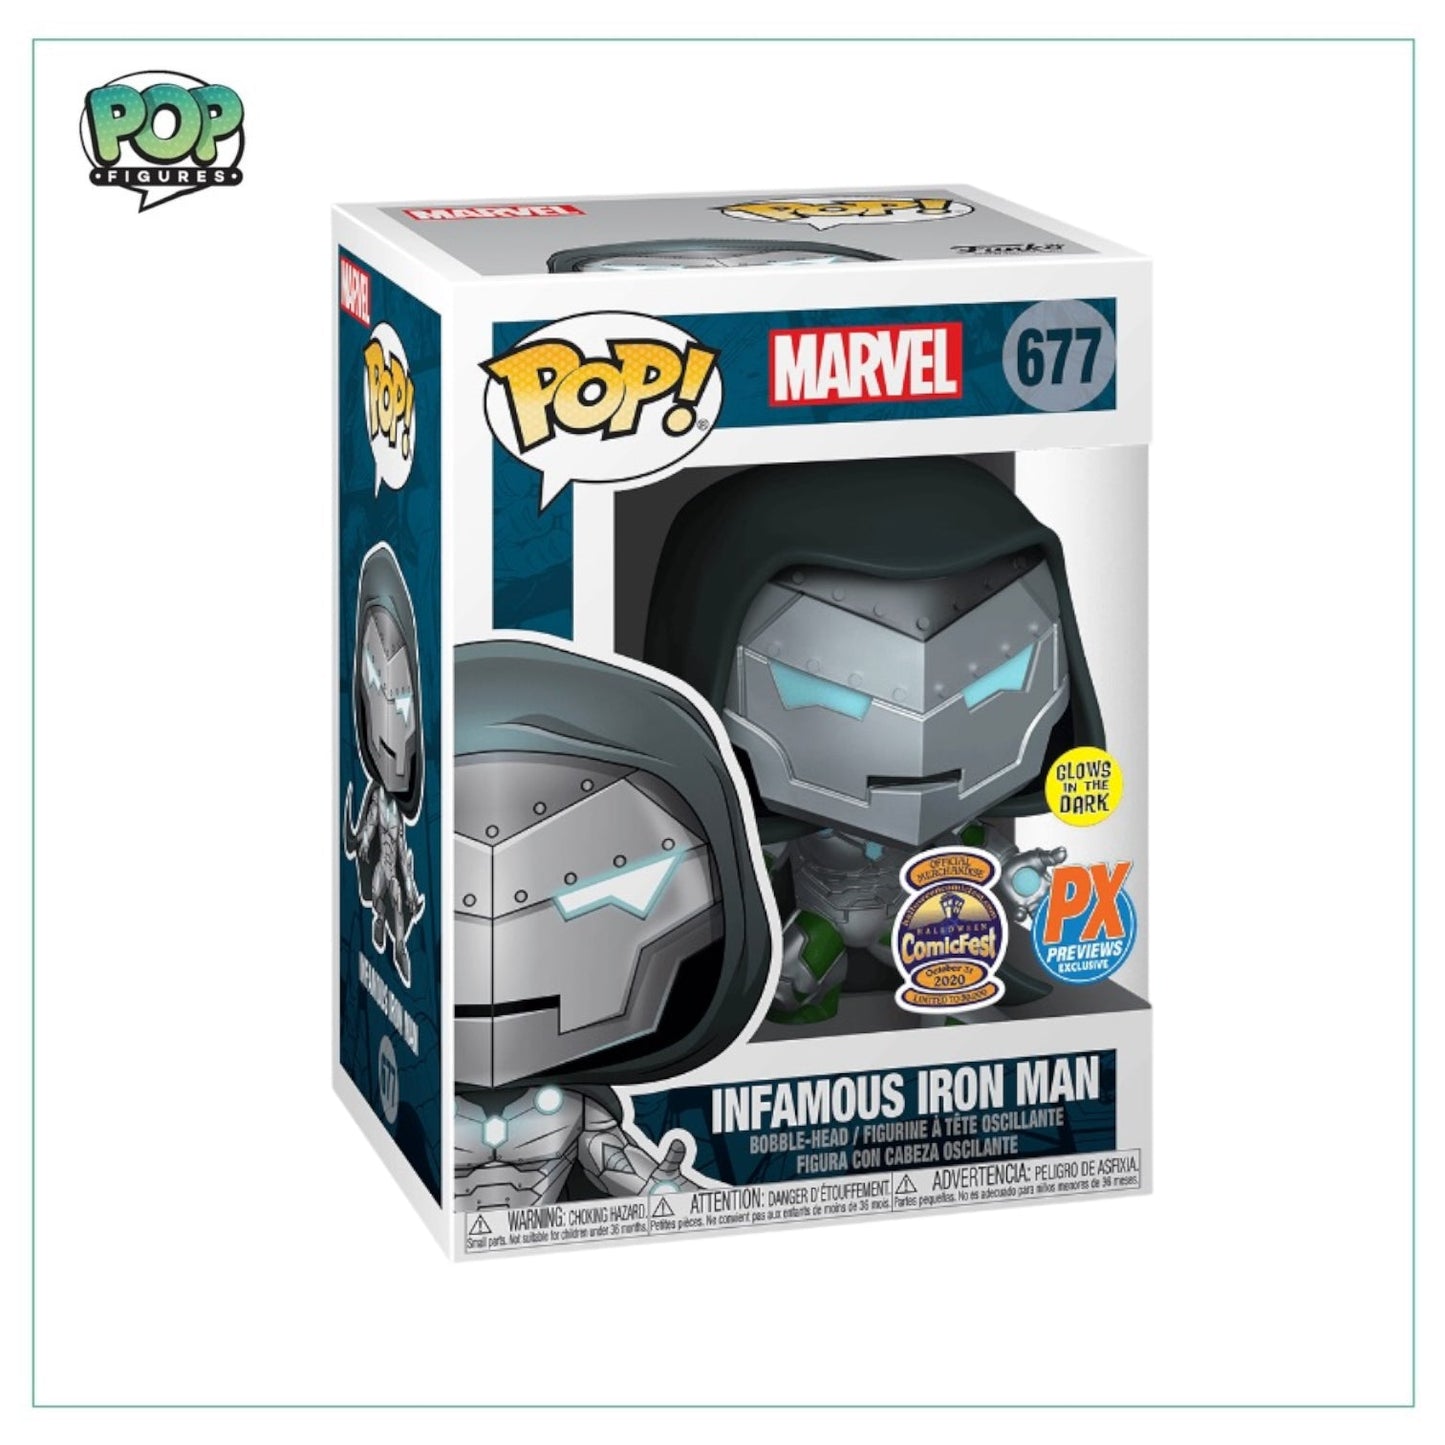 Infamous Iron Man (glow in the dark) #677 Funko Pop! - Marvel - Halloween Comicfest 2020 LE30000- Px Preview Exclusive - Angry Cat